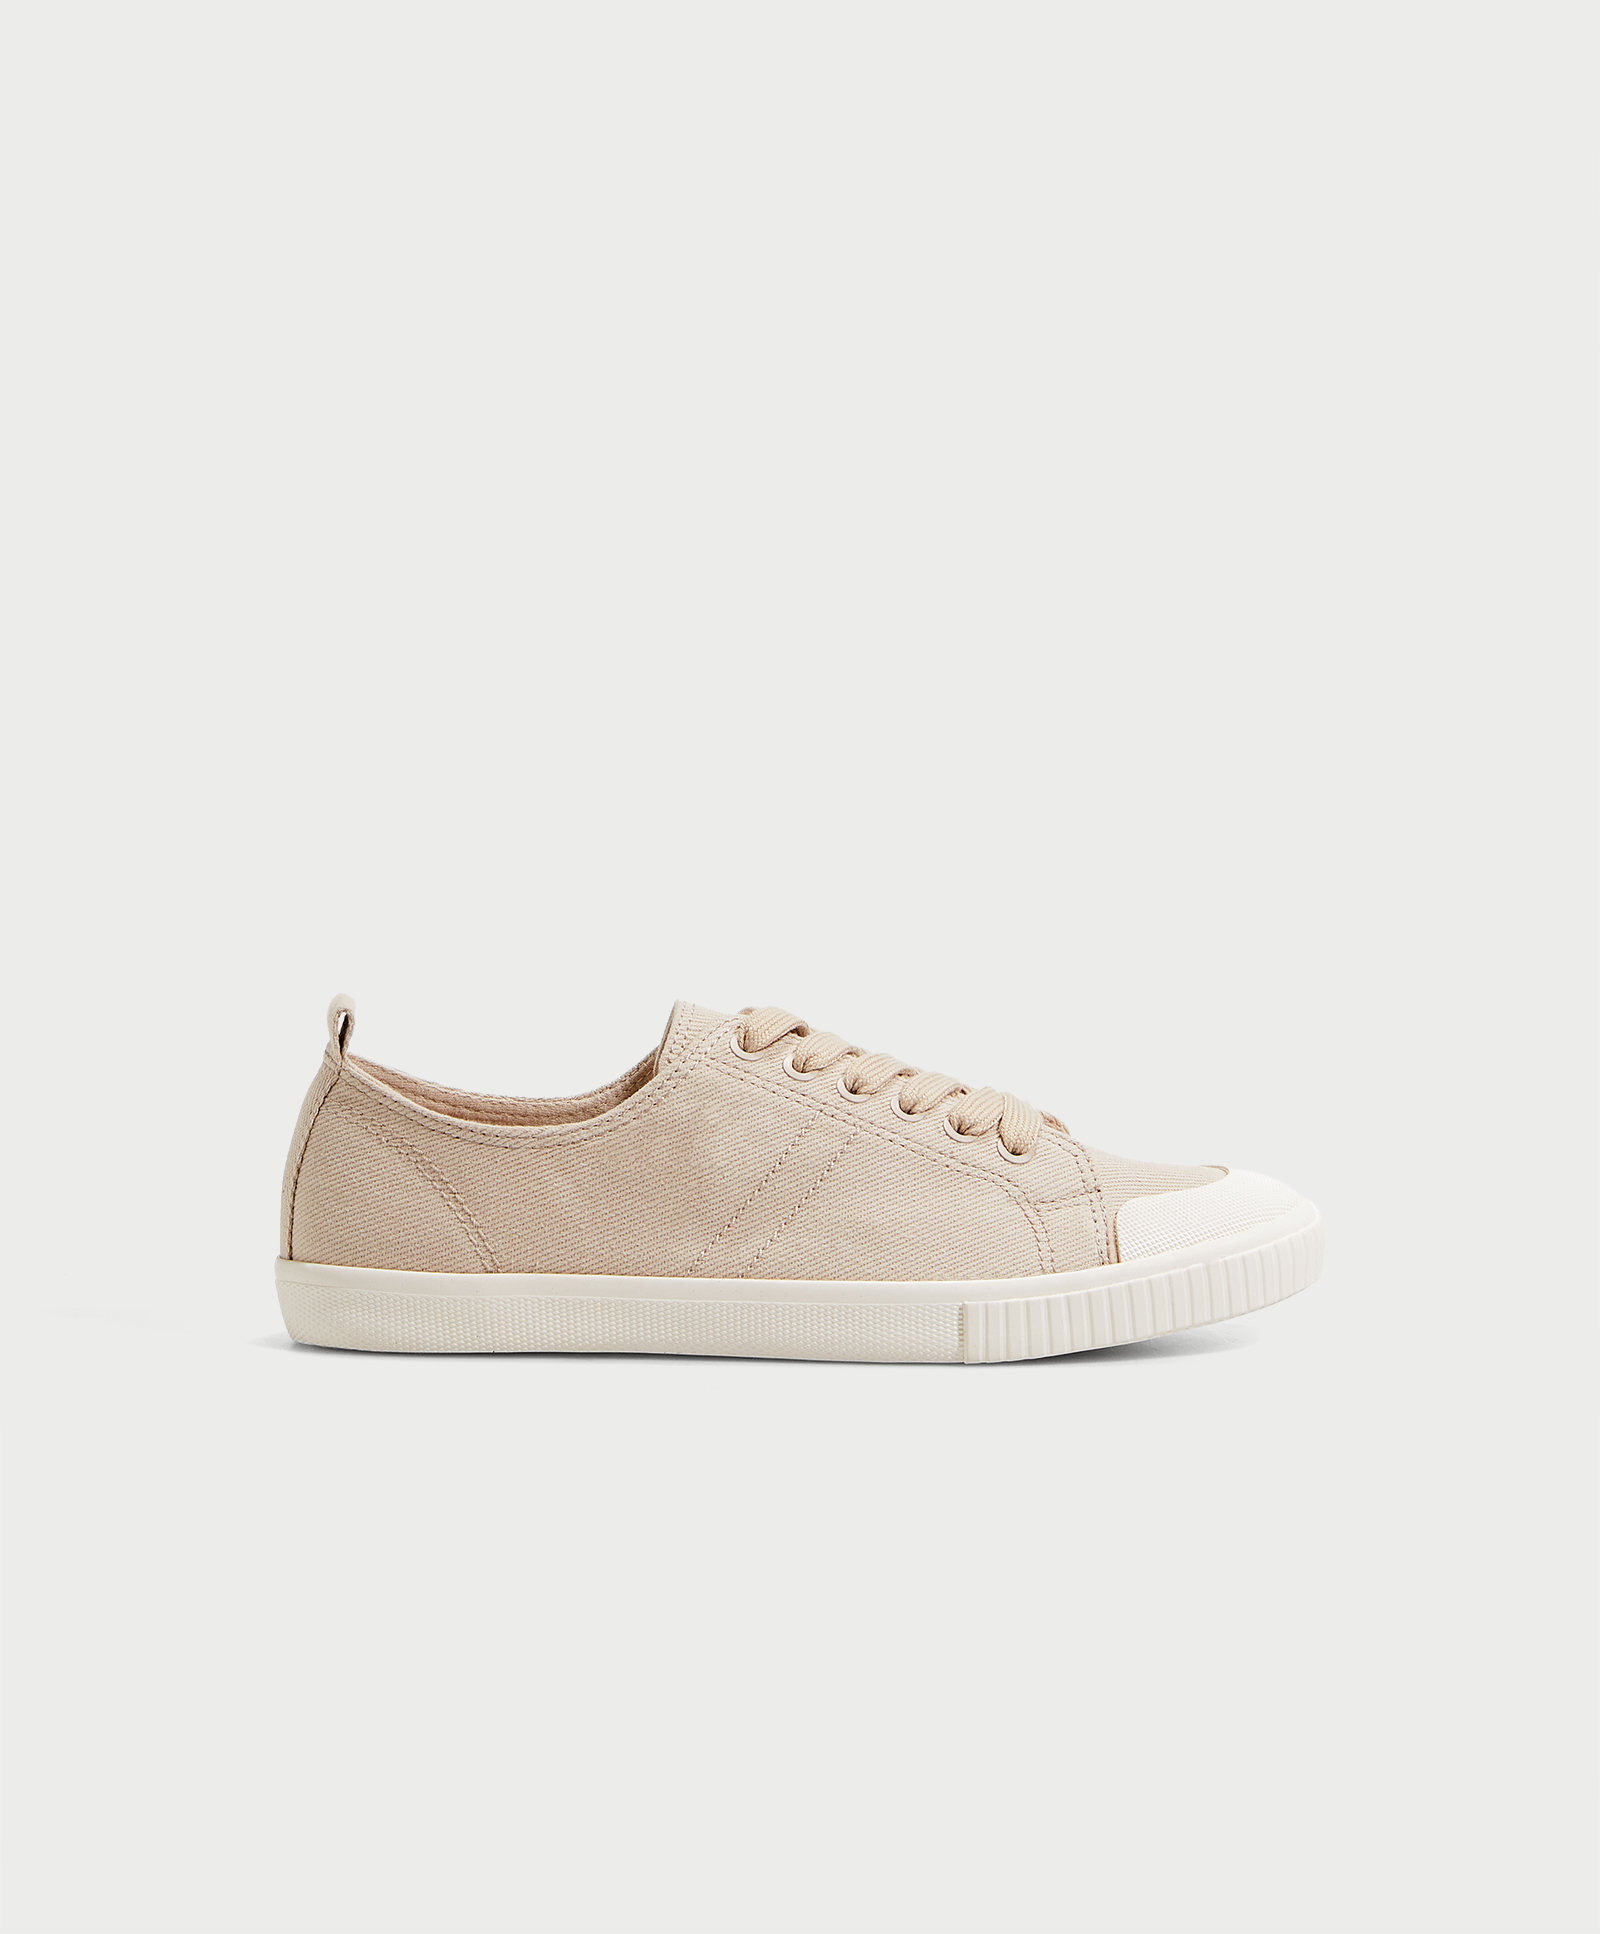 Fabric sneakers with toe cap detail